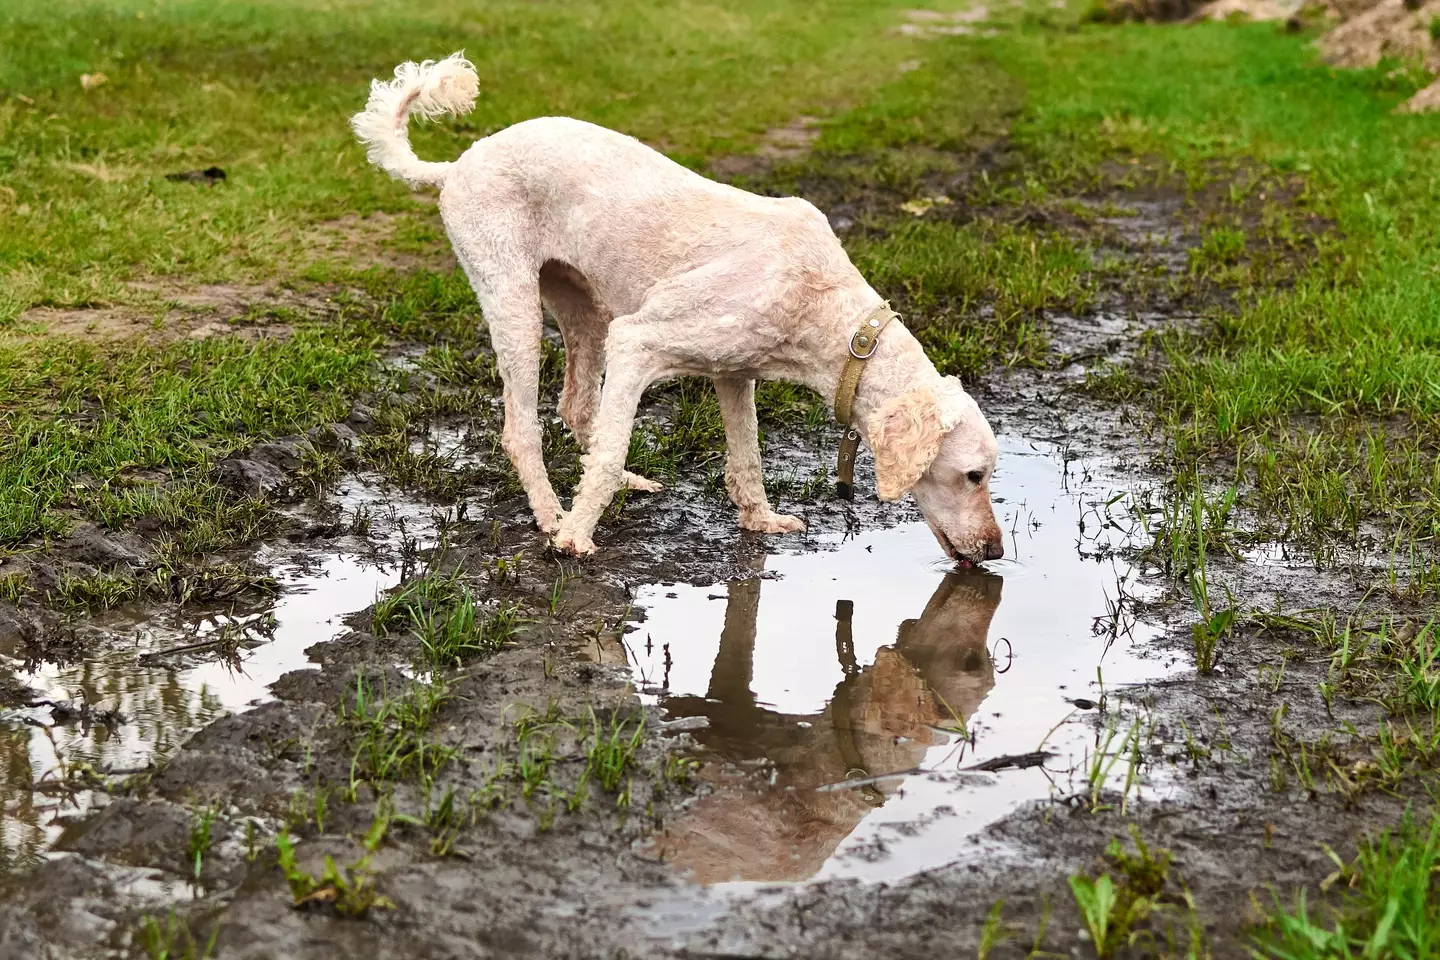 Dog owners should be aware of puddles during walks (